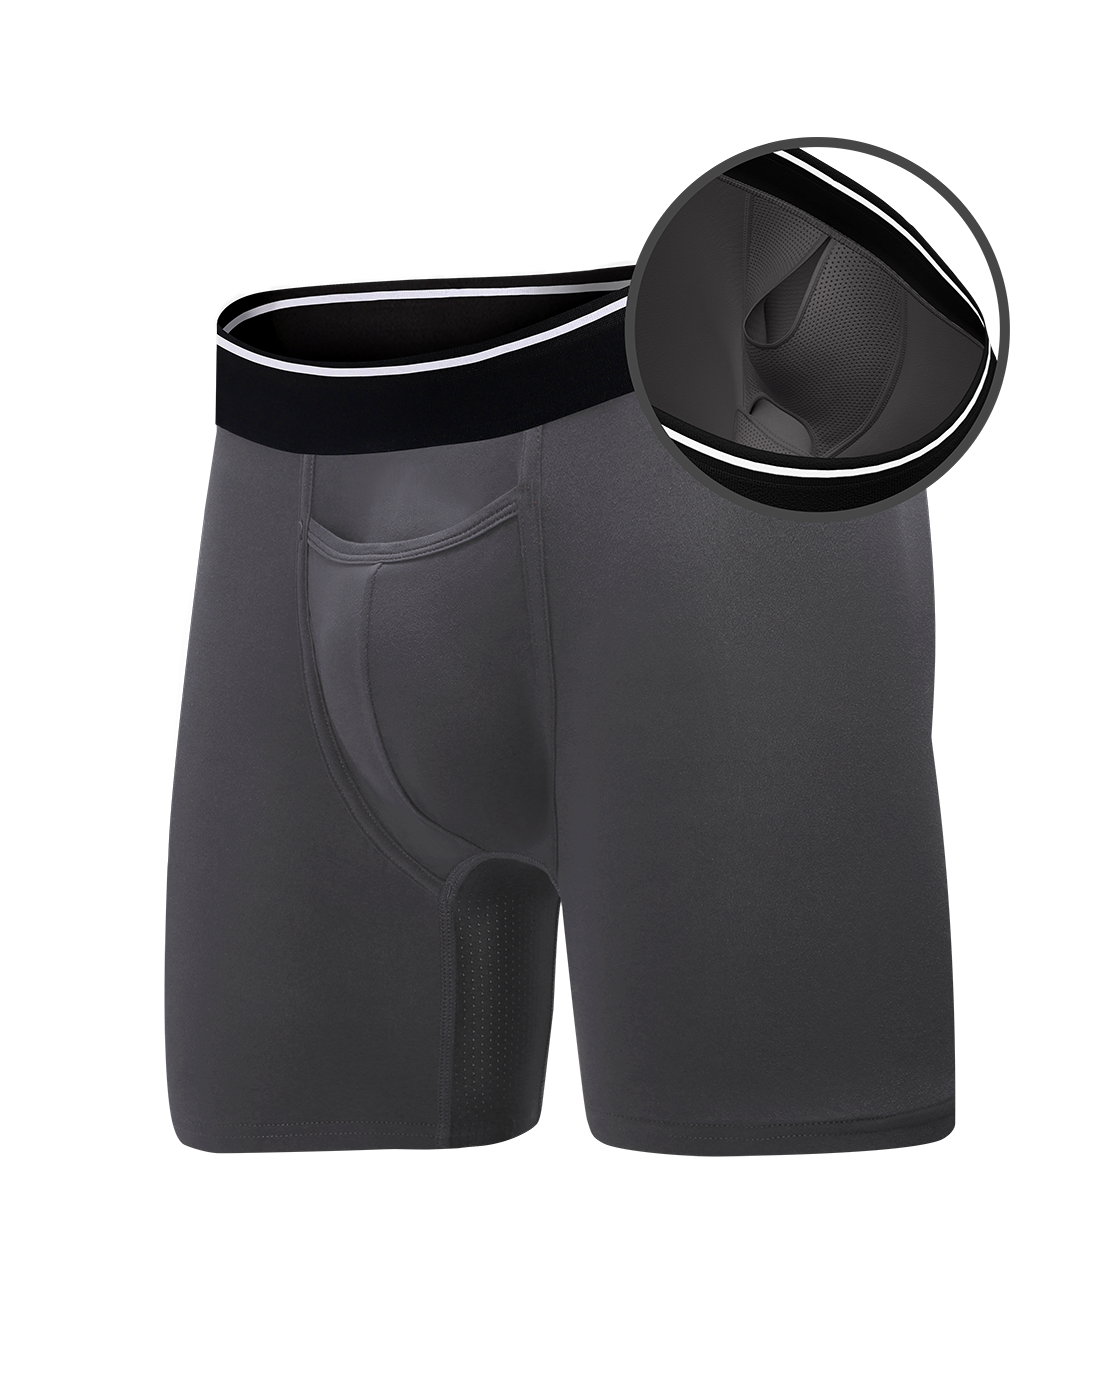 Men's Underwear Expert Separatec Introduces New Summer Offering Featuring Dual  Pouch™ and Quick-Dry Performance